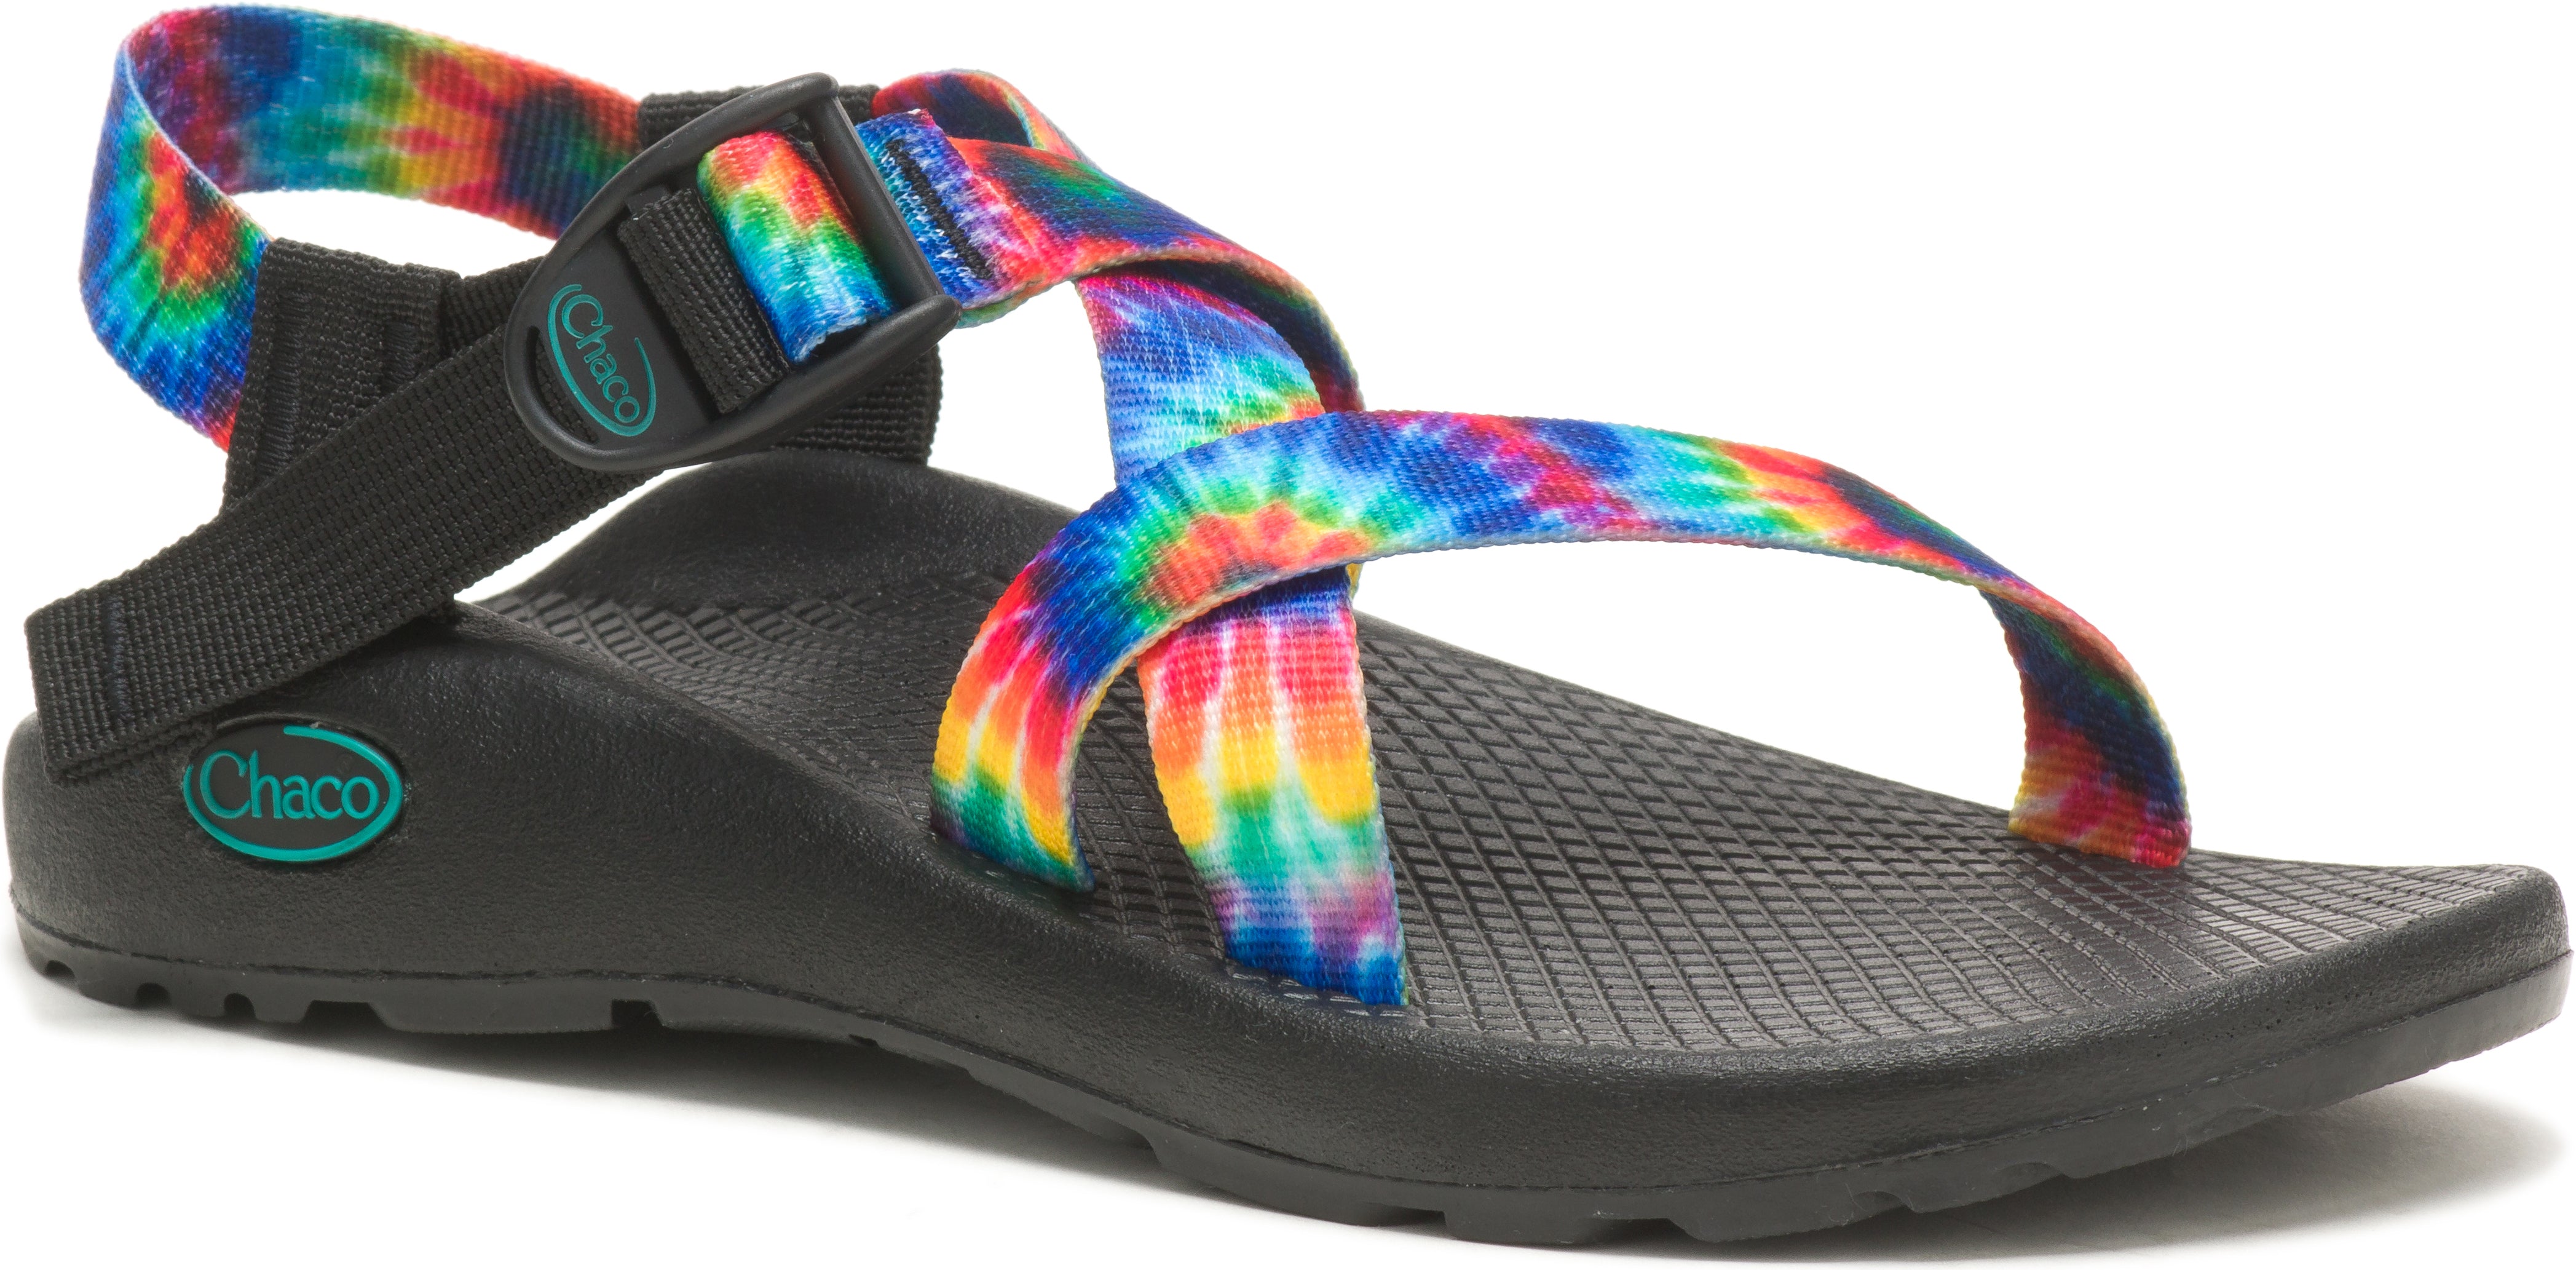 Chaco, Chaco Z/1 Classic donna tie dye